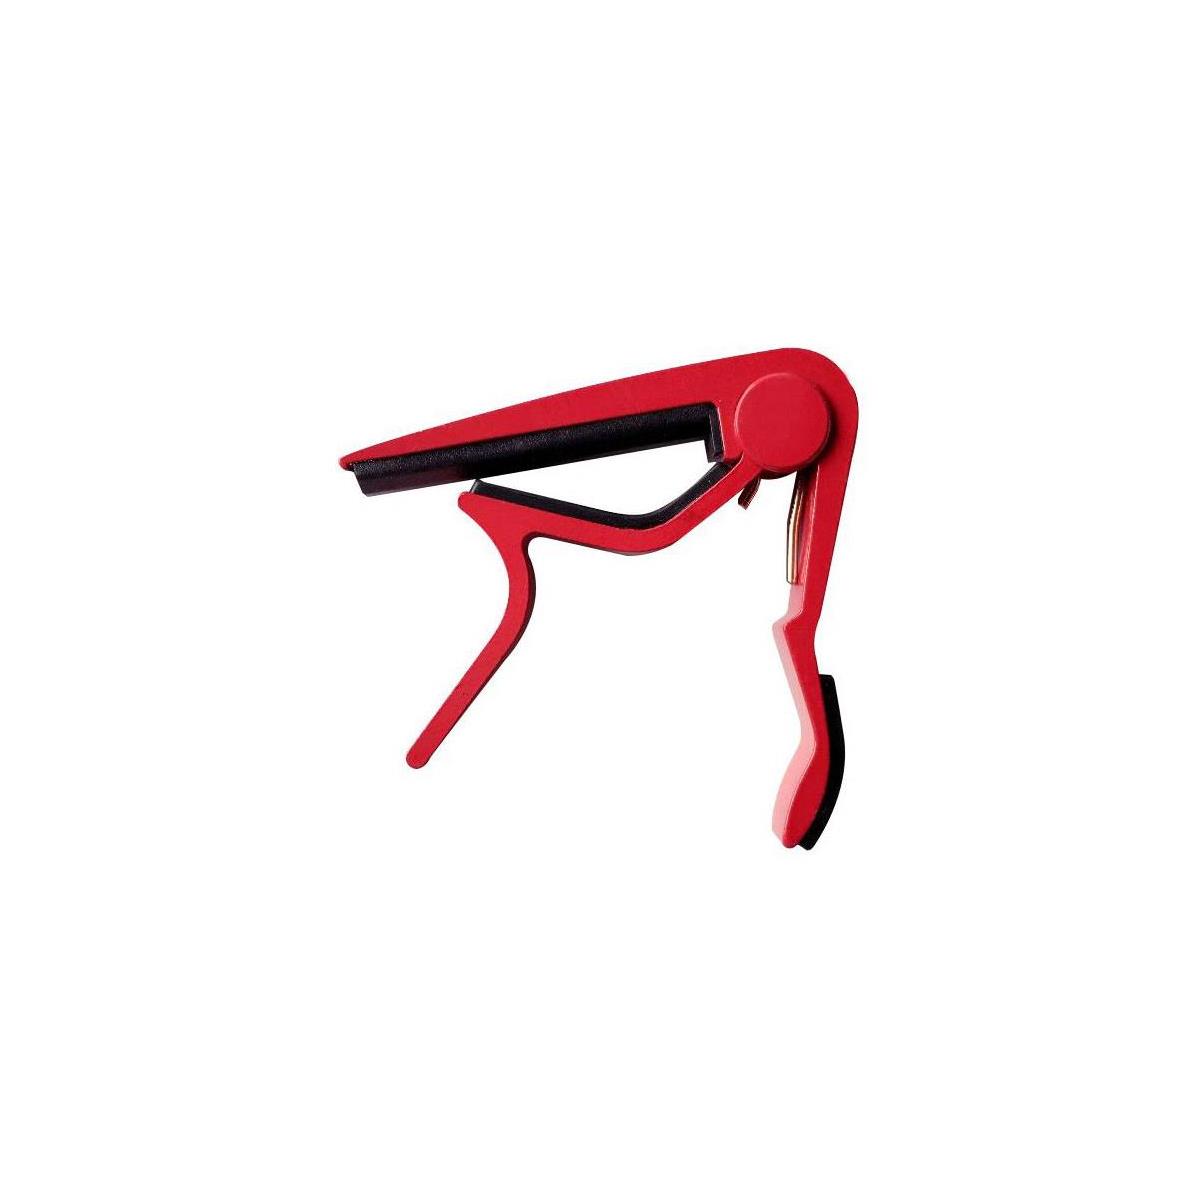 Audio 2000s AST4355 Classical Guitar Capo, Red -  AST4355RD